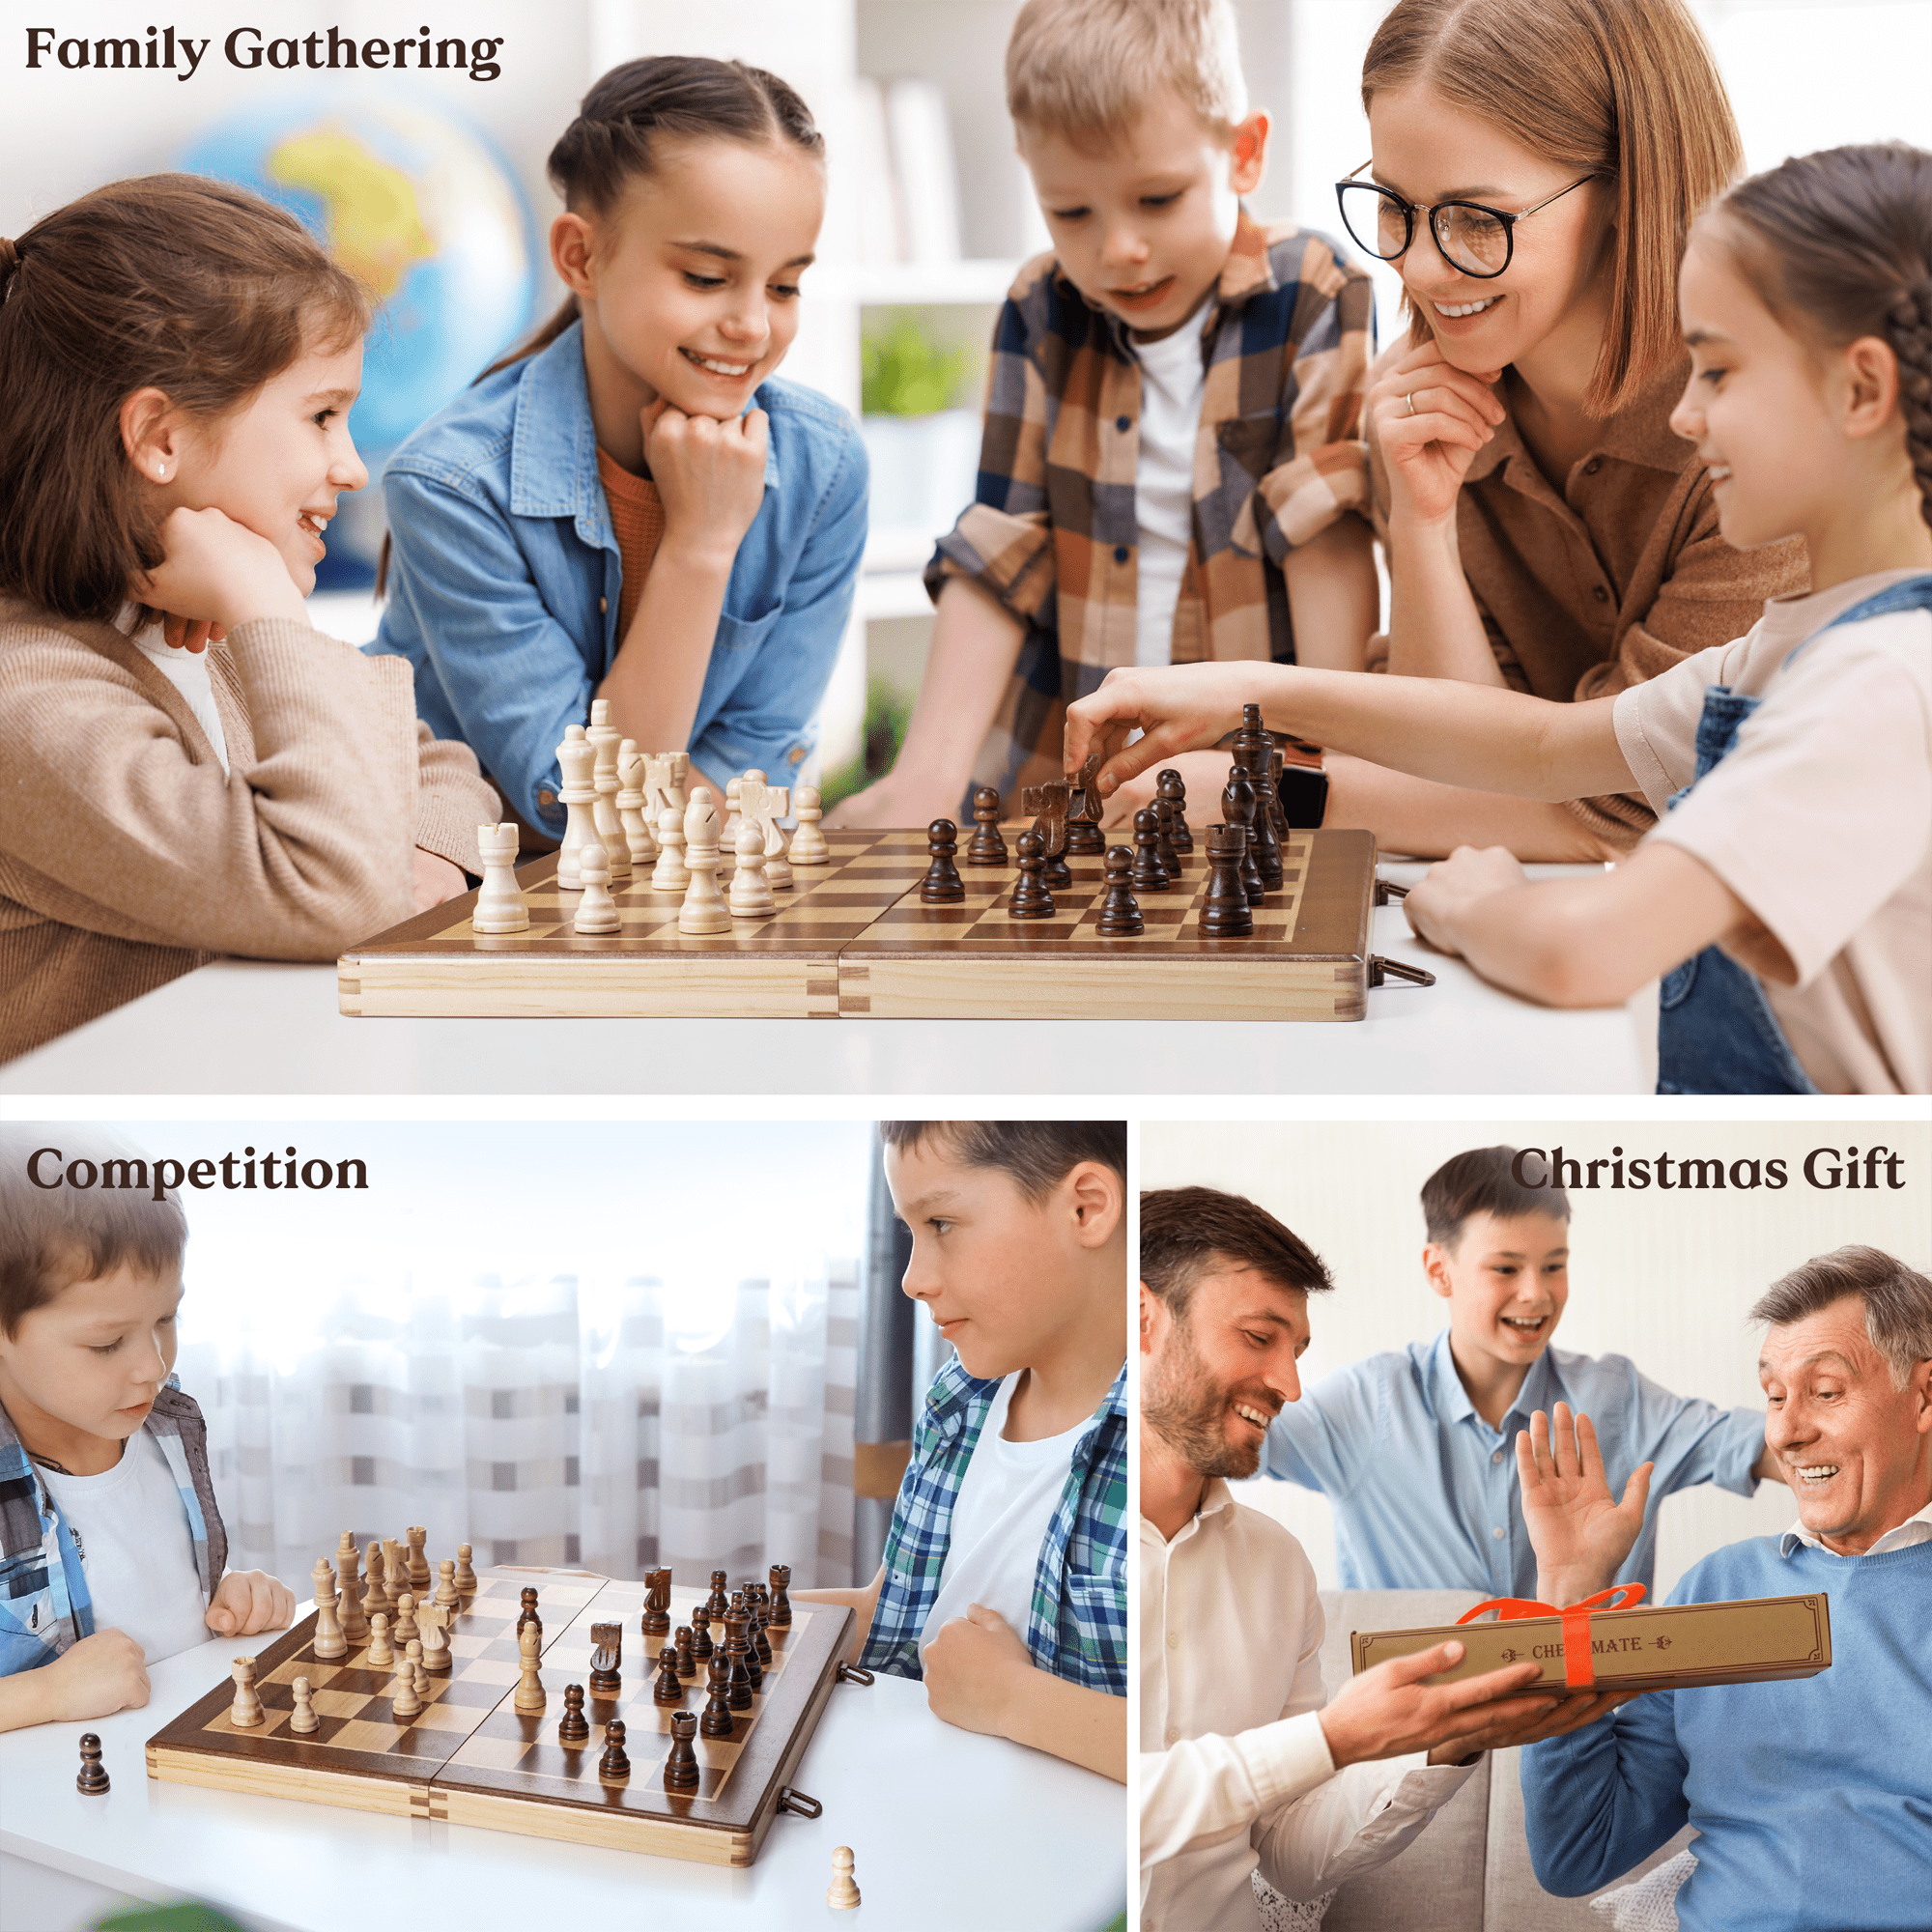 Portable Chess Board Foldable Magnetic Chess Game Board Game Foldable Chess Board Magnetic 2 in 1 Handmade Chess Toy and Gift for Children 39 x 39 cm